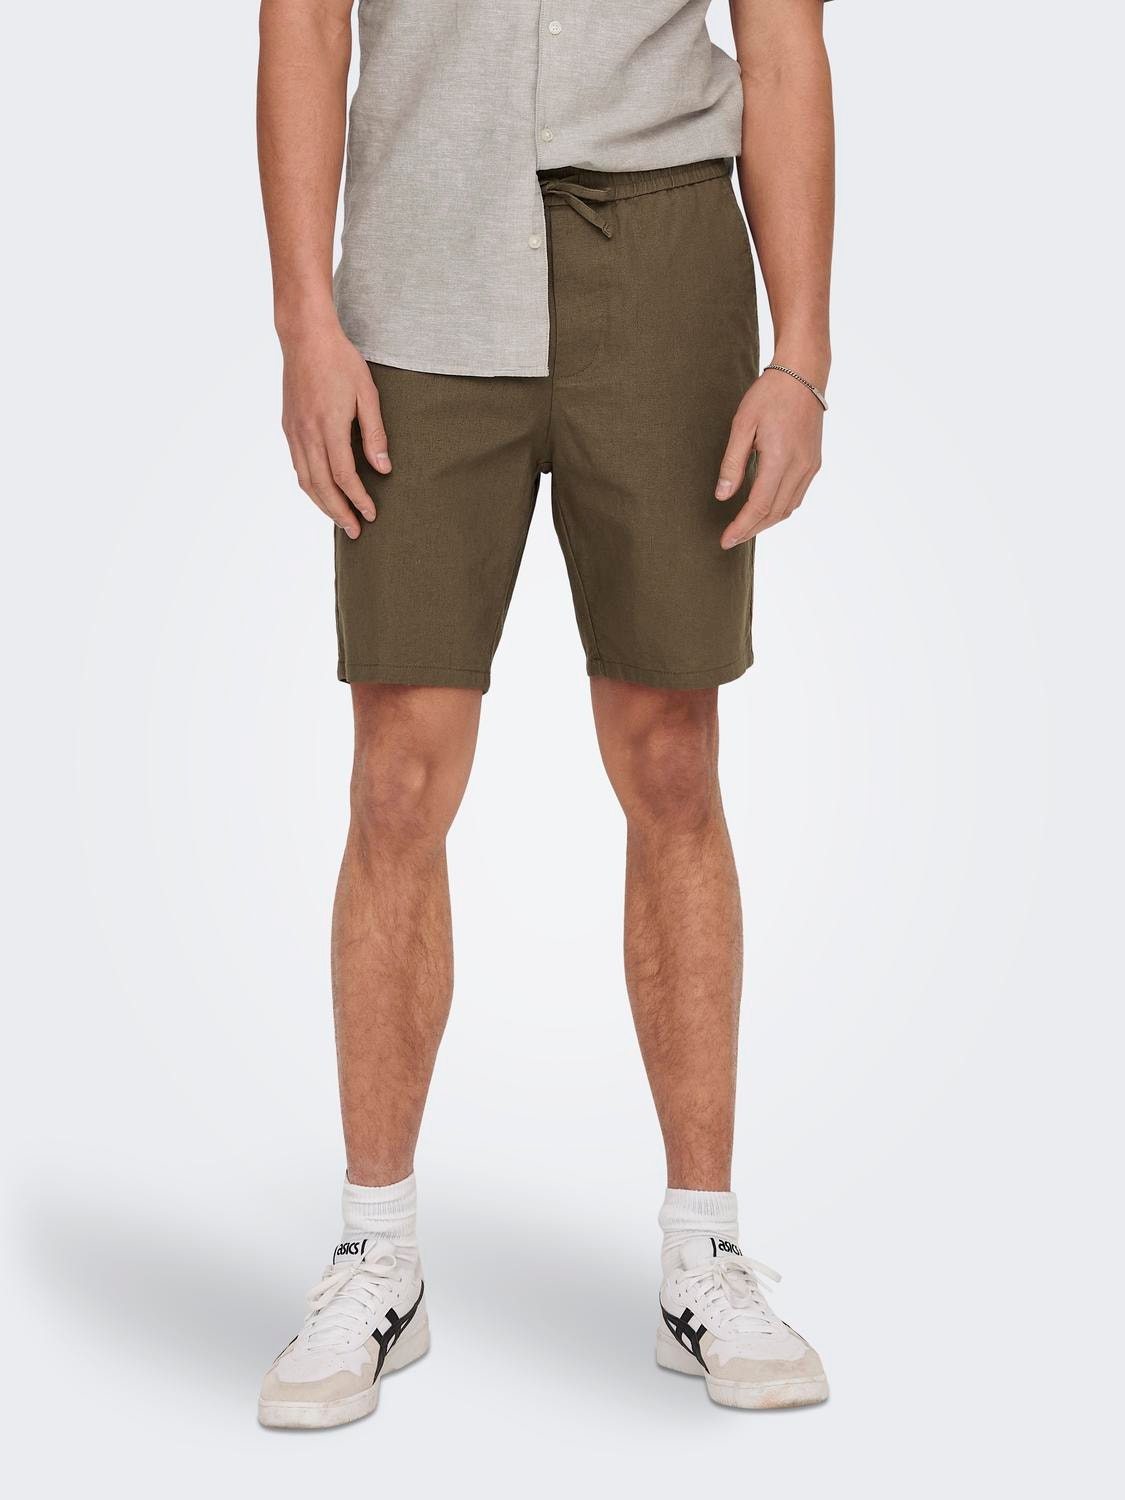 ONLY & SONS Shorts Loose Fit -Teak - 22024967